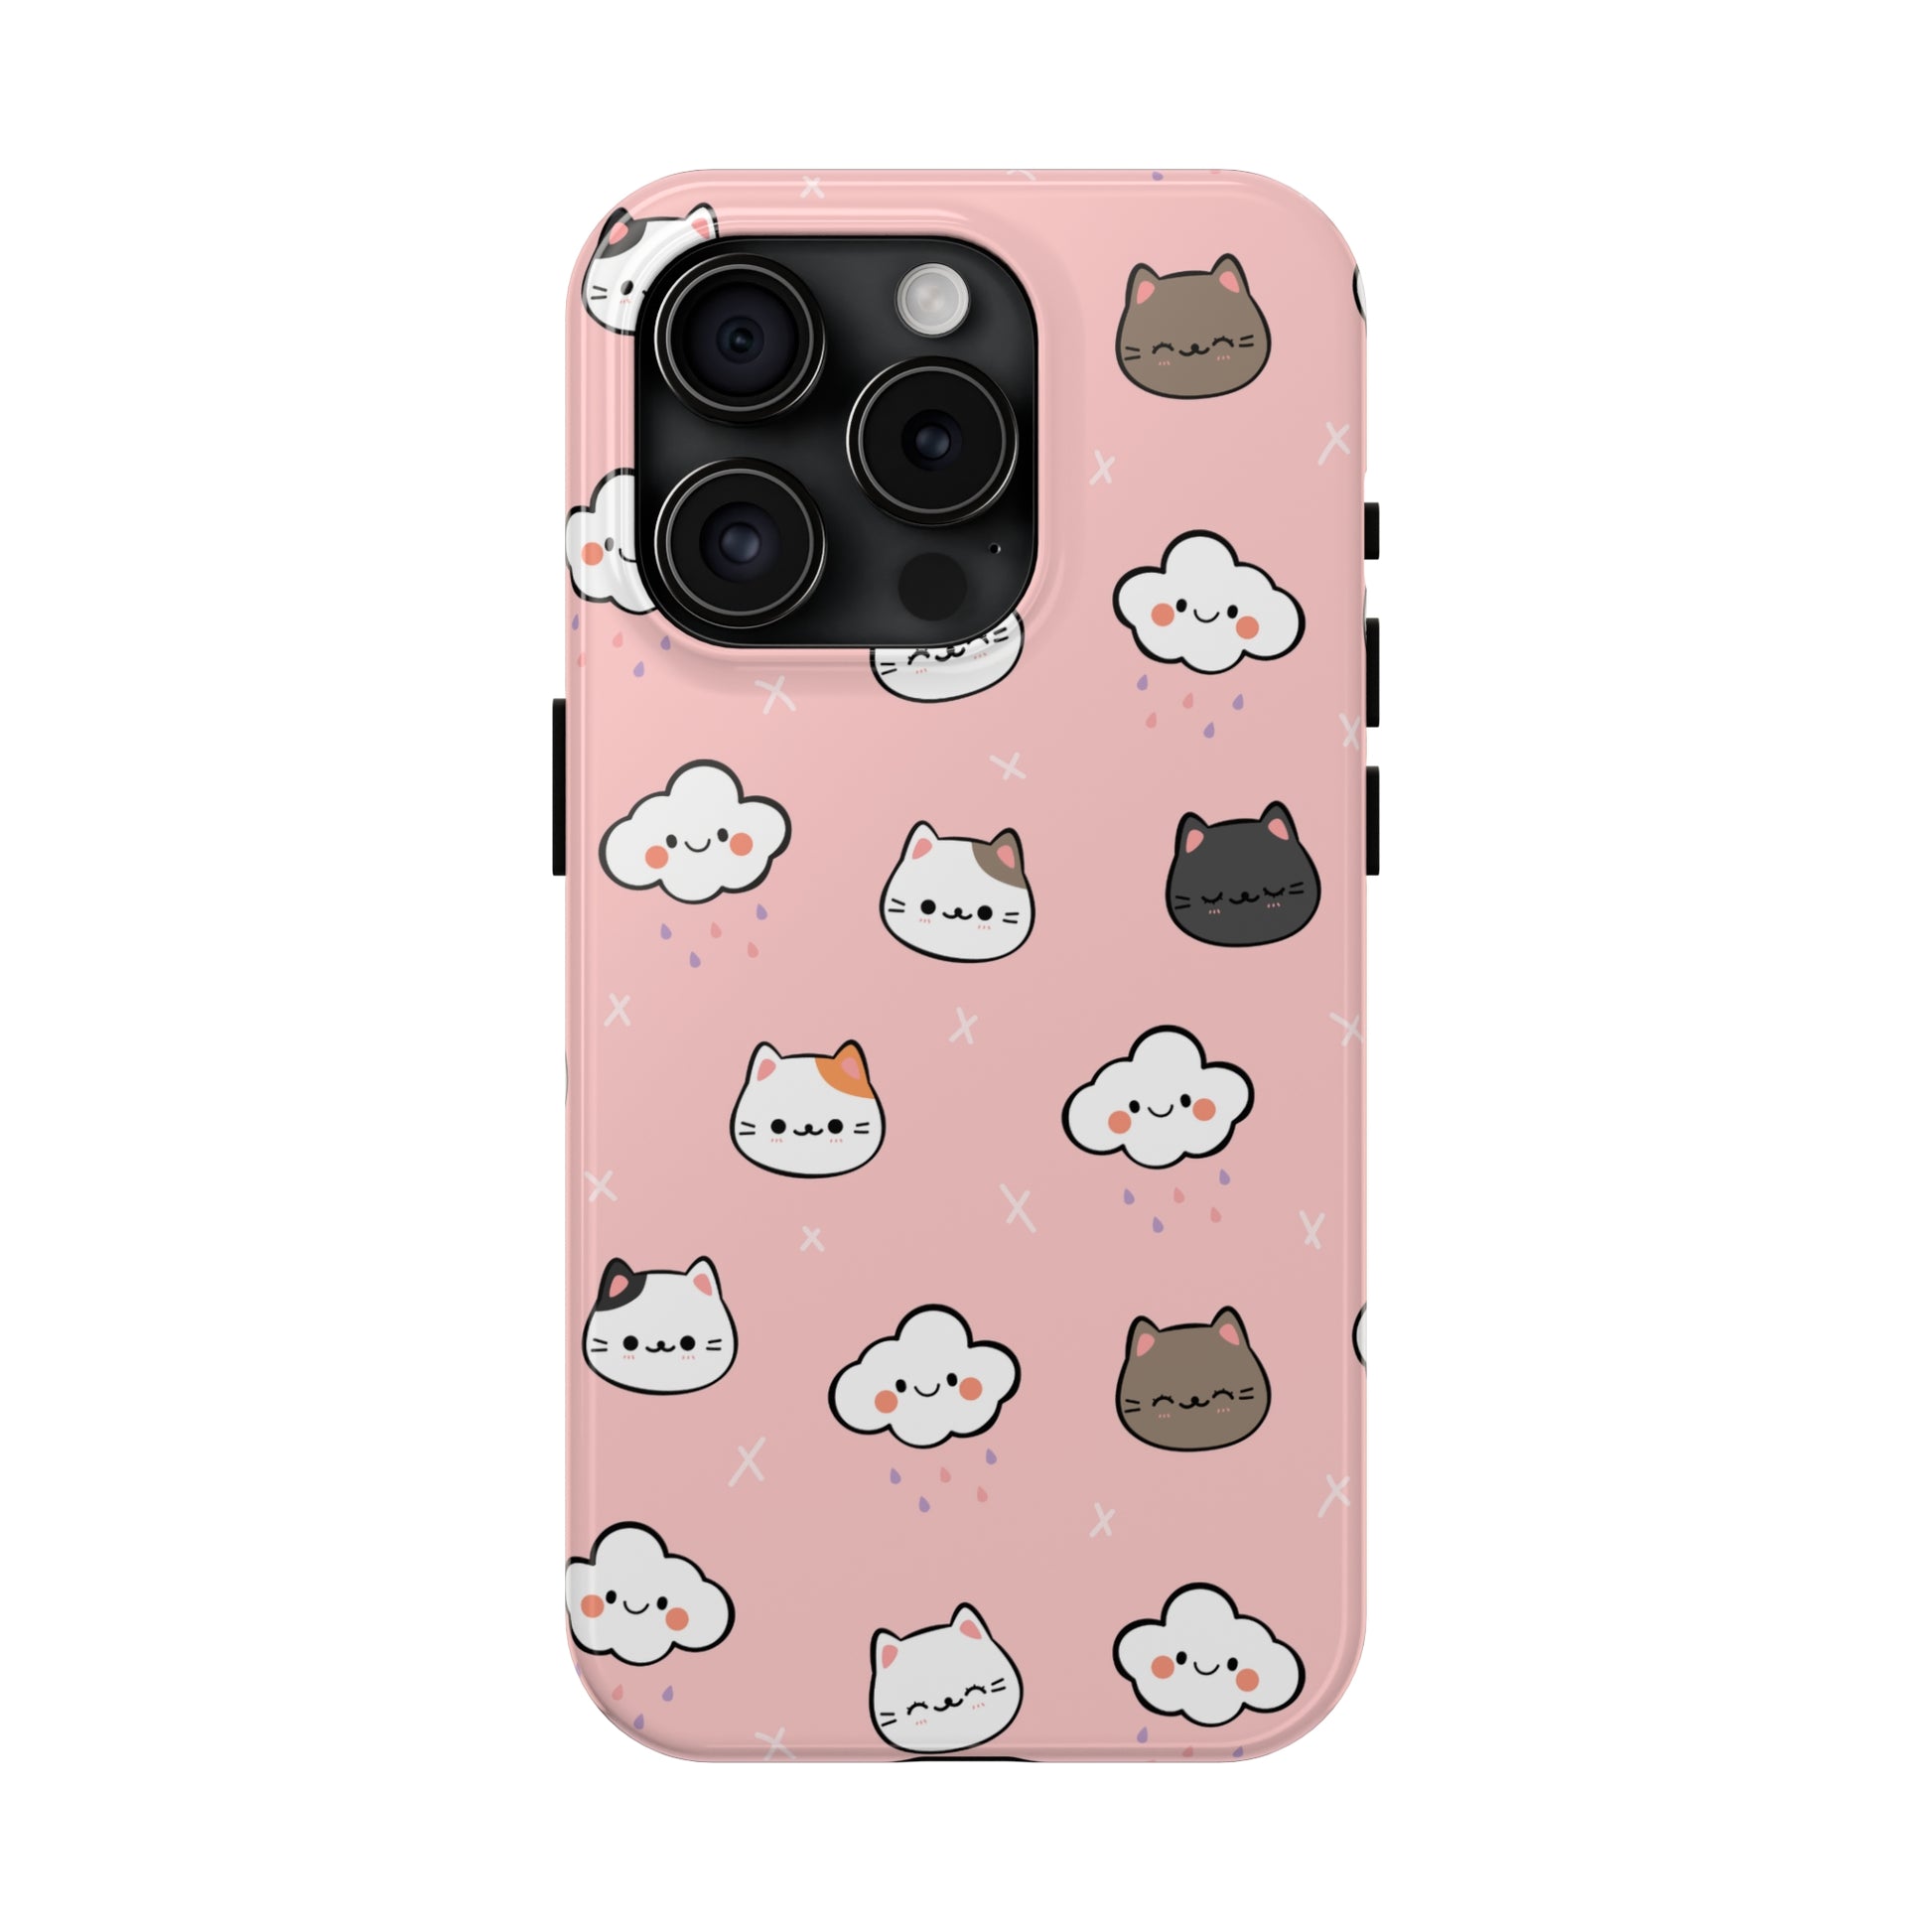 Purrfect Skies (iPhone Case 11-15)Shop RIMA Tough Phone Case for iPhone 11-15: Ultimate protection with double-layer defense, glossy finish, and wireless charging compatibility. Urban and weather-resRimaGallery